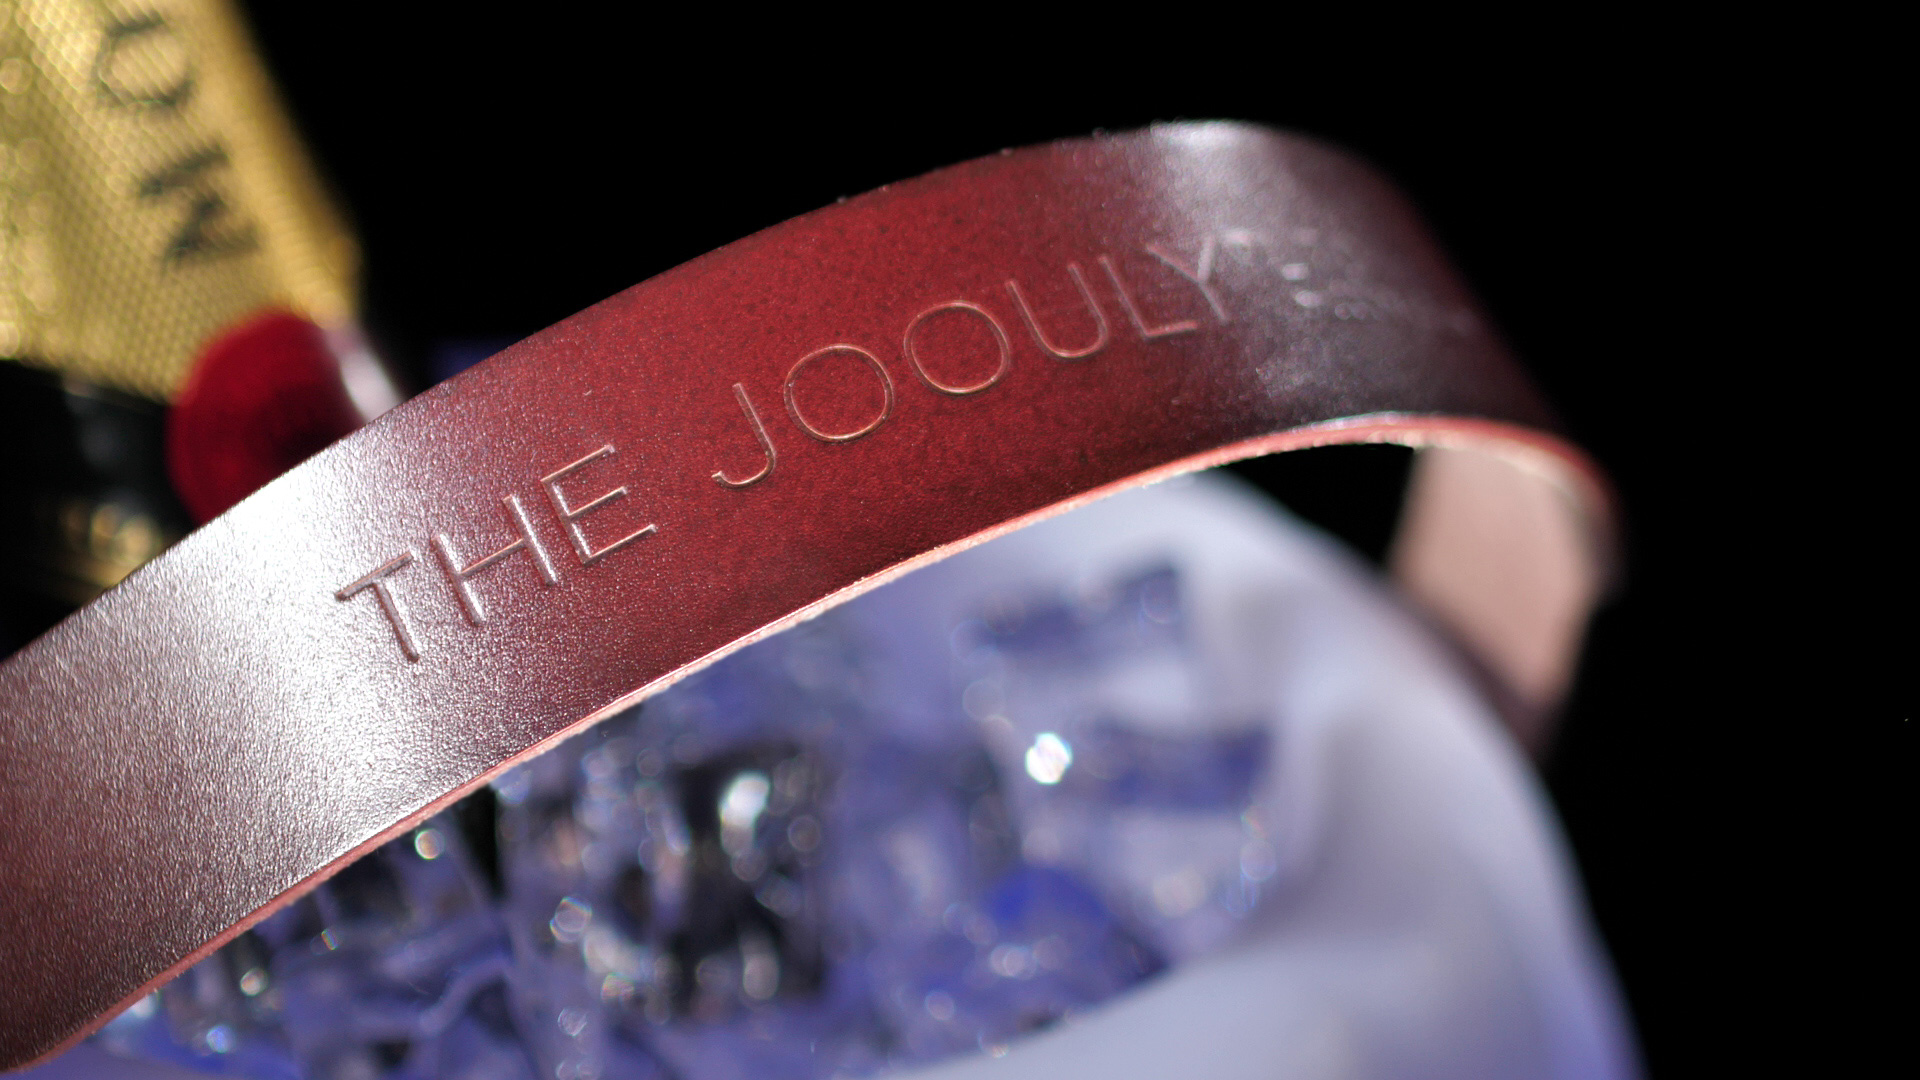 The Joouly Limited